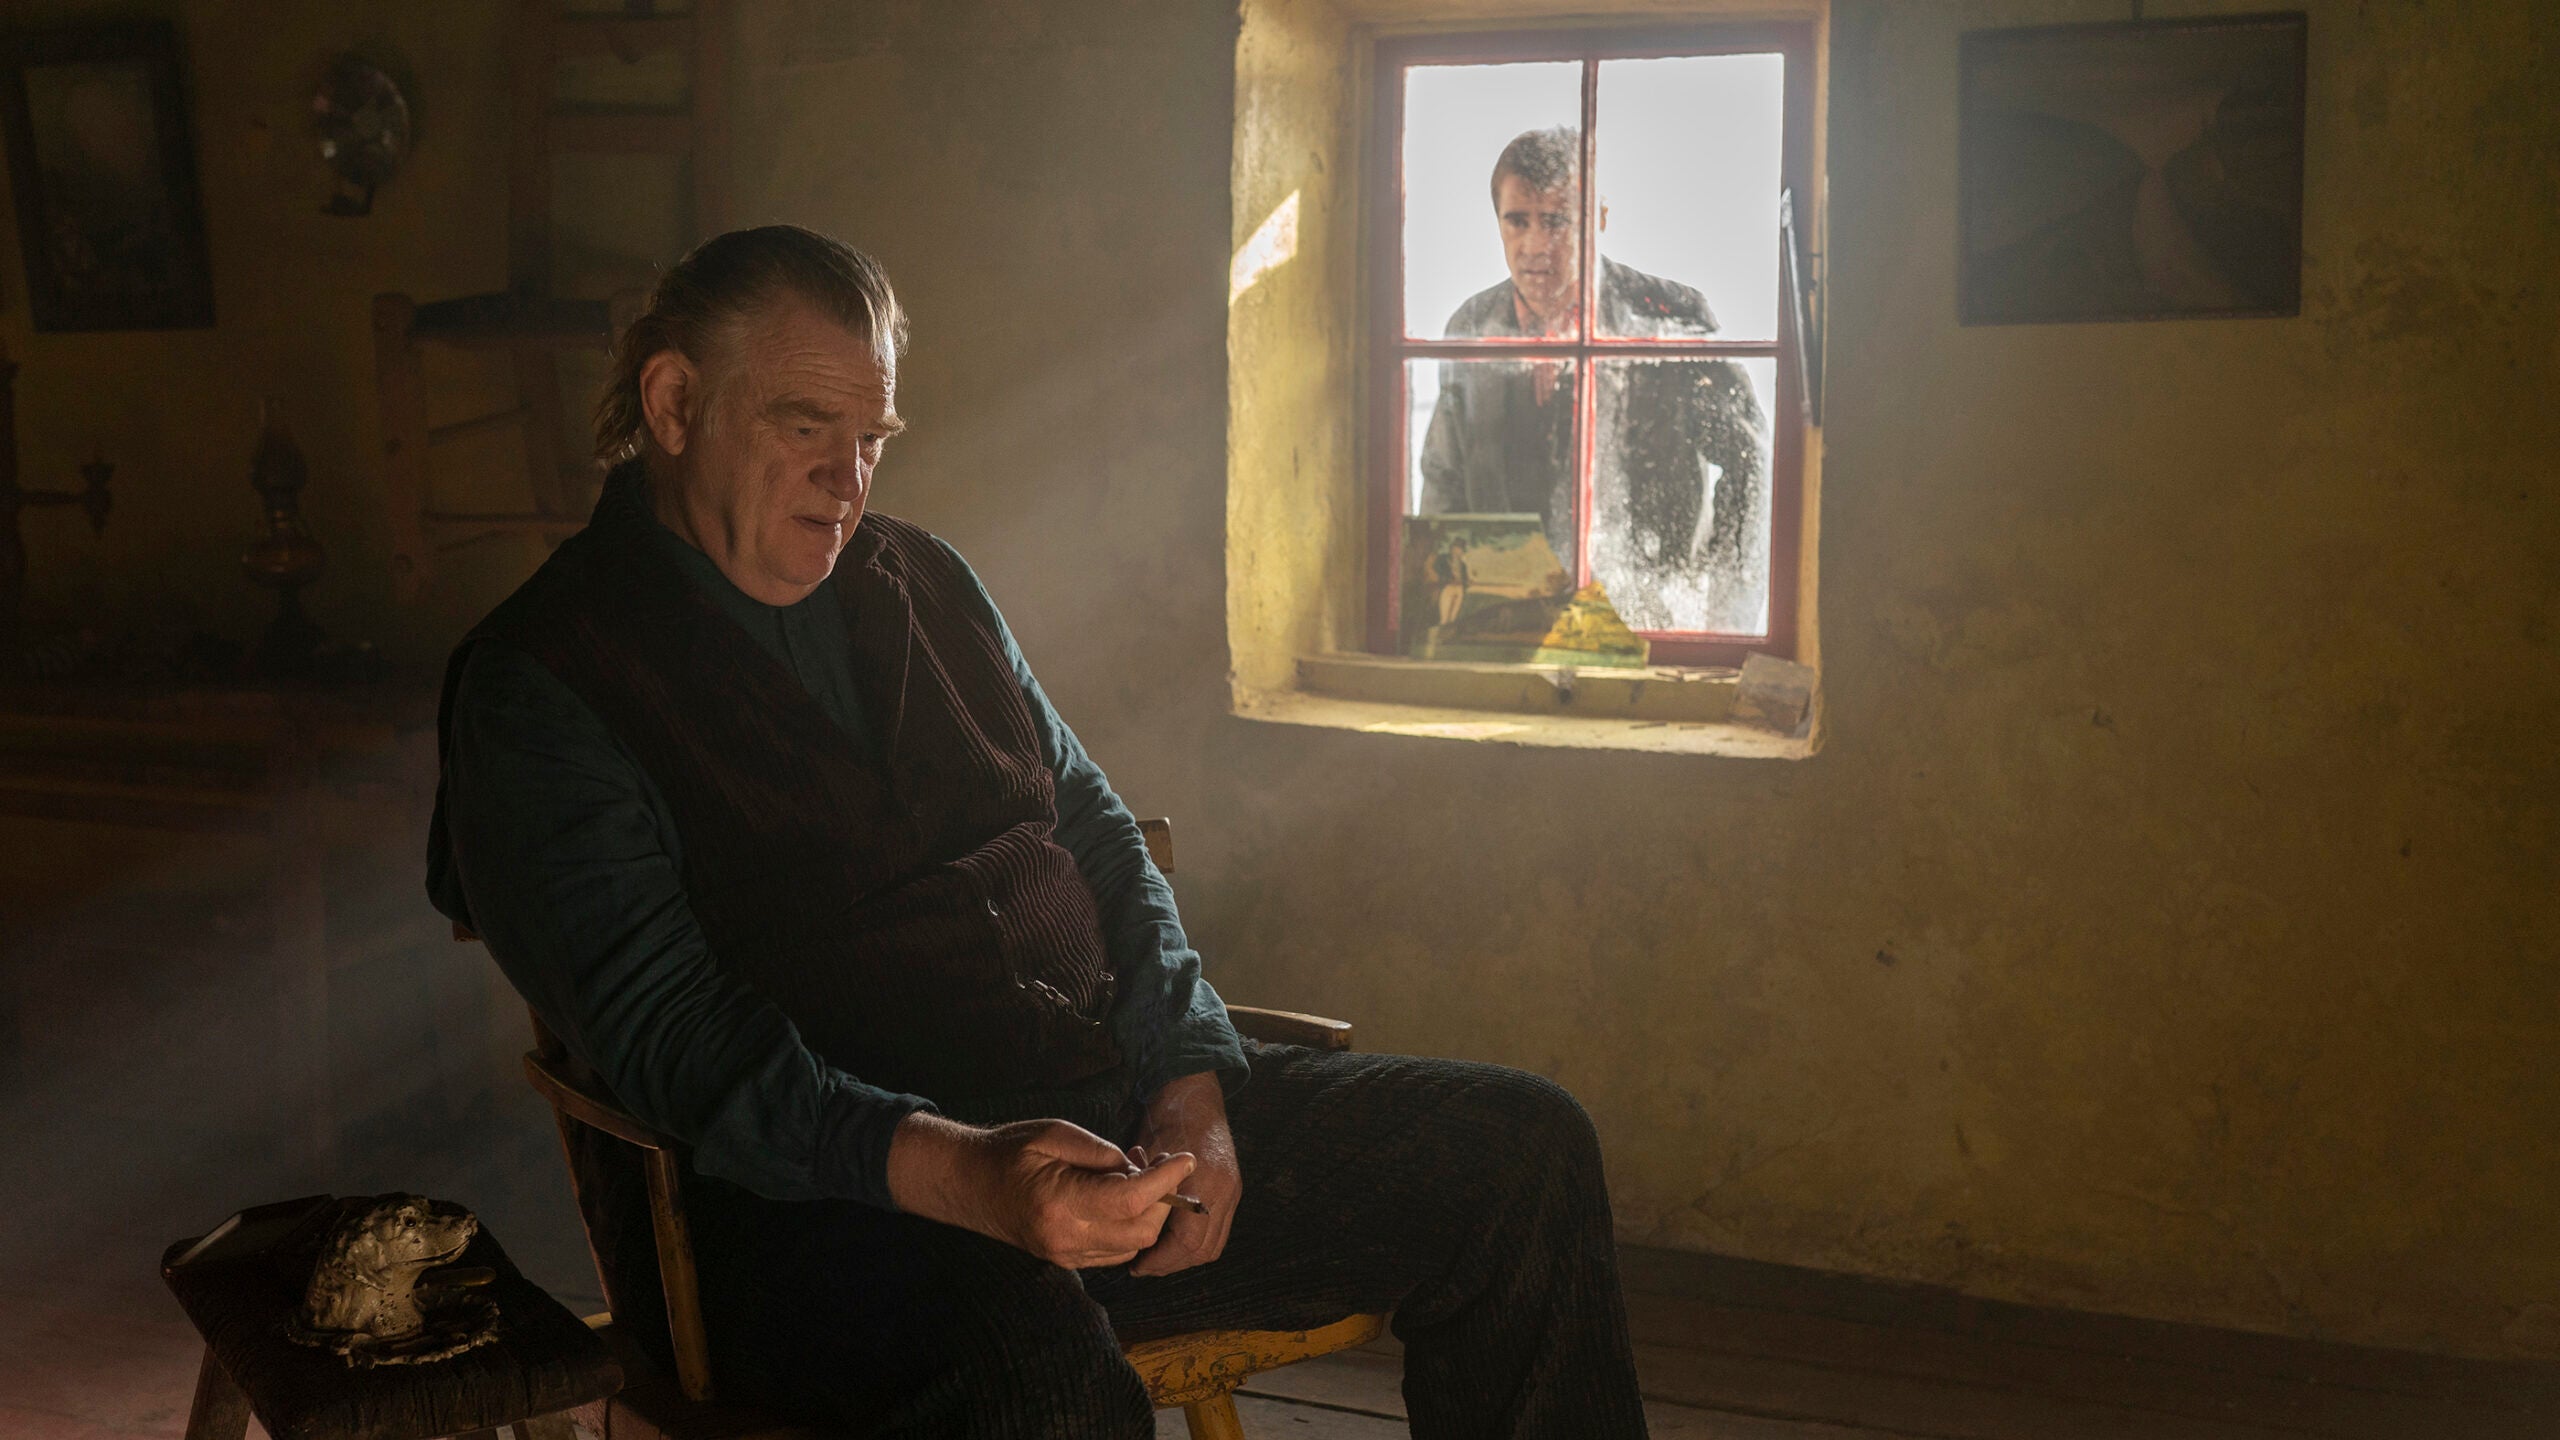 Brendan Gleeson sitting in the foreground and Colin Farrell looking at him through a window in "The Banshees of Inisherin."